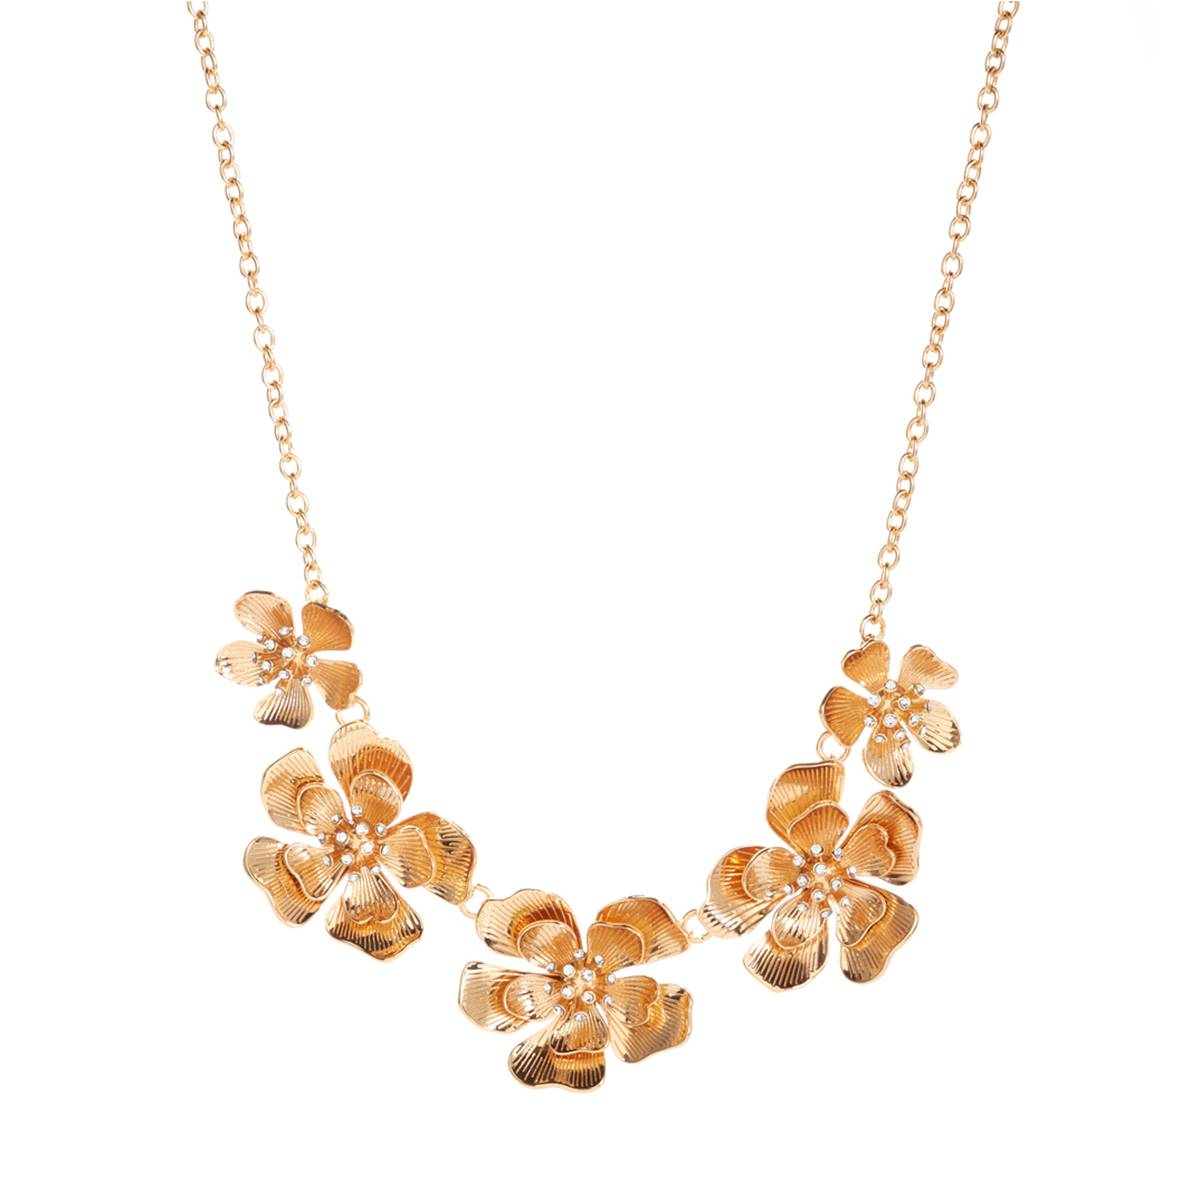 Ashley Cooper(tm) Gold-Tone Flower Frontal Necklace